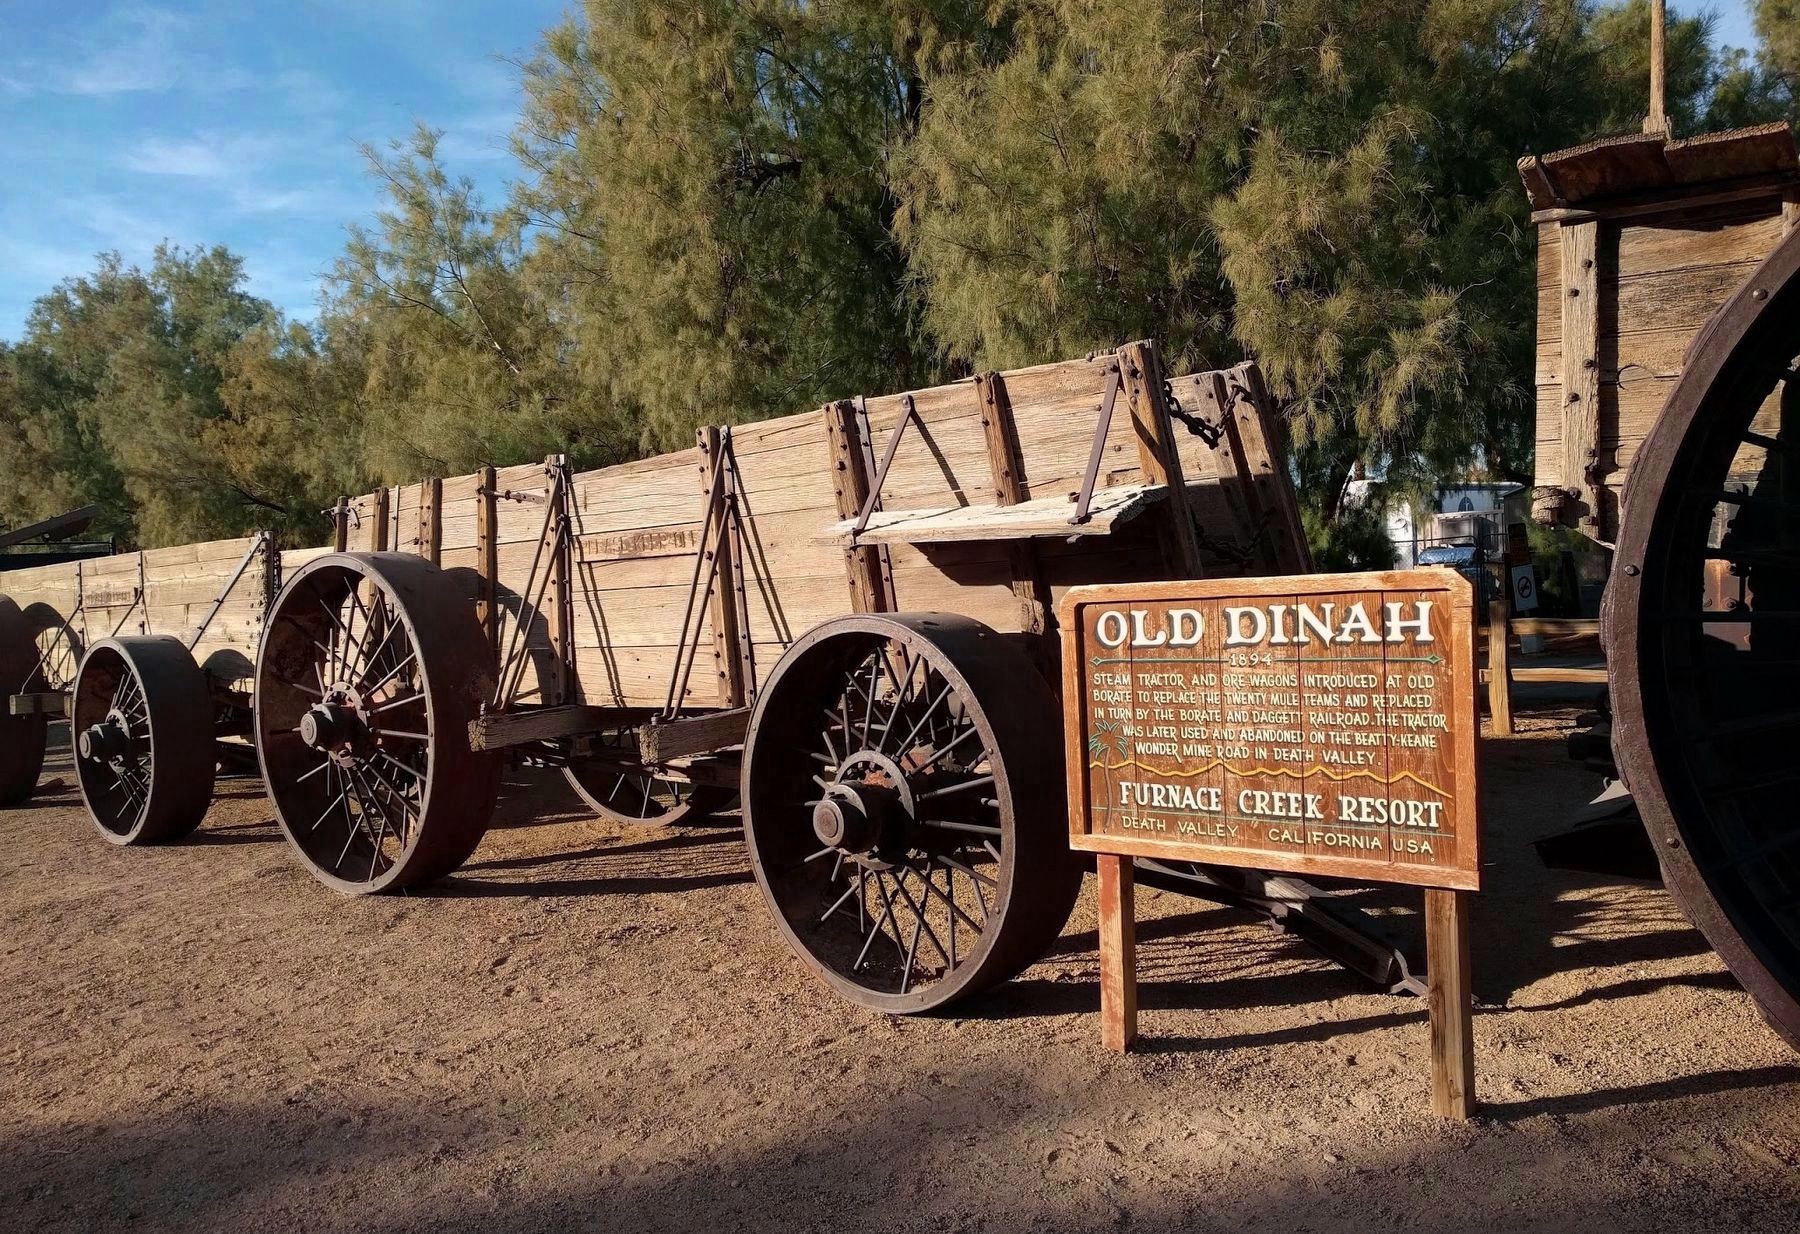 New Location and New Marker for Old Dinah. Same Old Text on Marker. image. Click for full size.